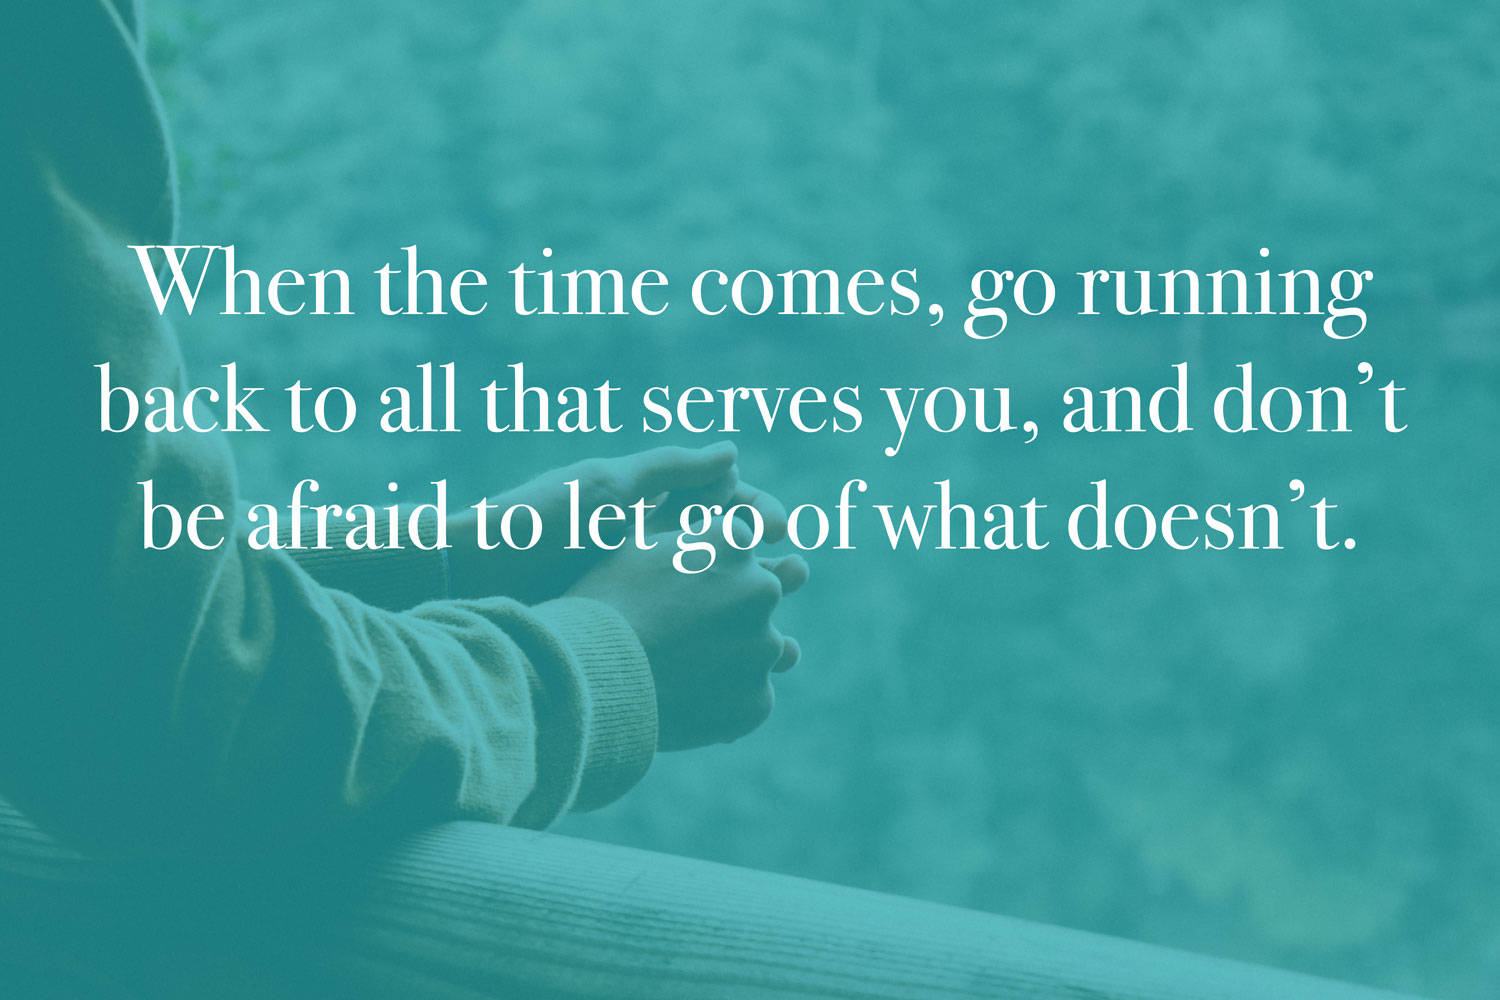 When the time comes, go running back to all that serves you, and don't be afraid to let go of what doesn't.